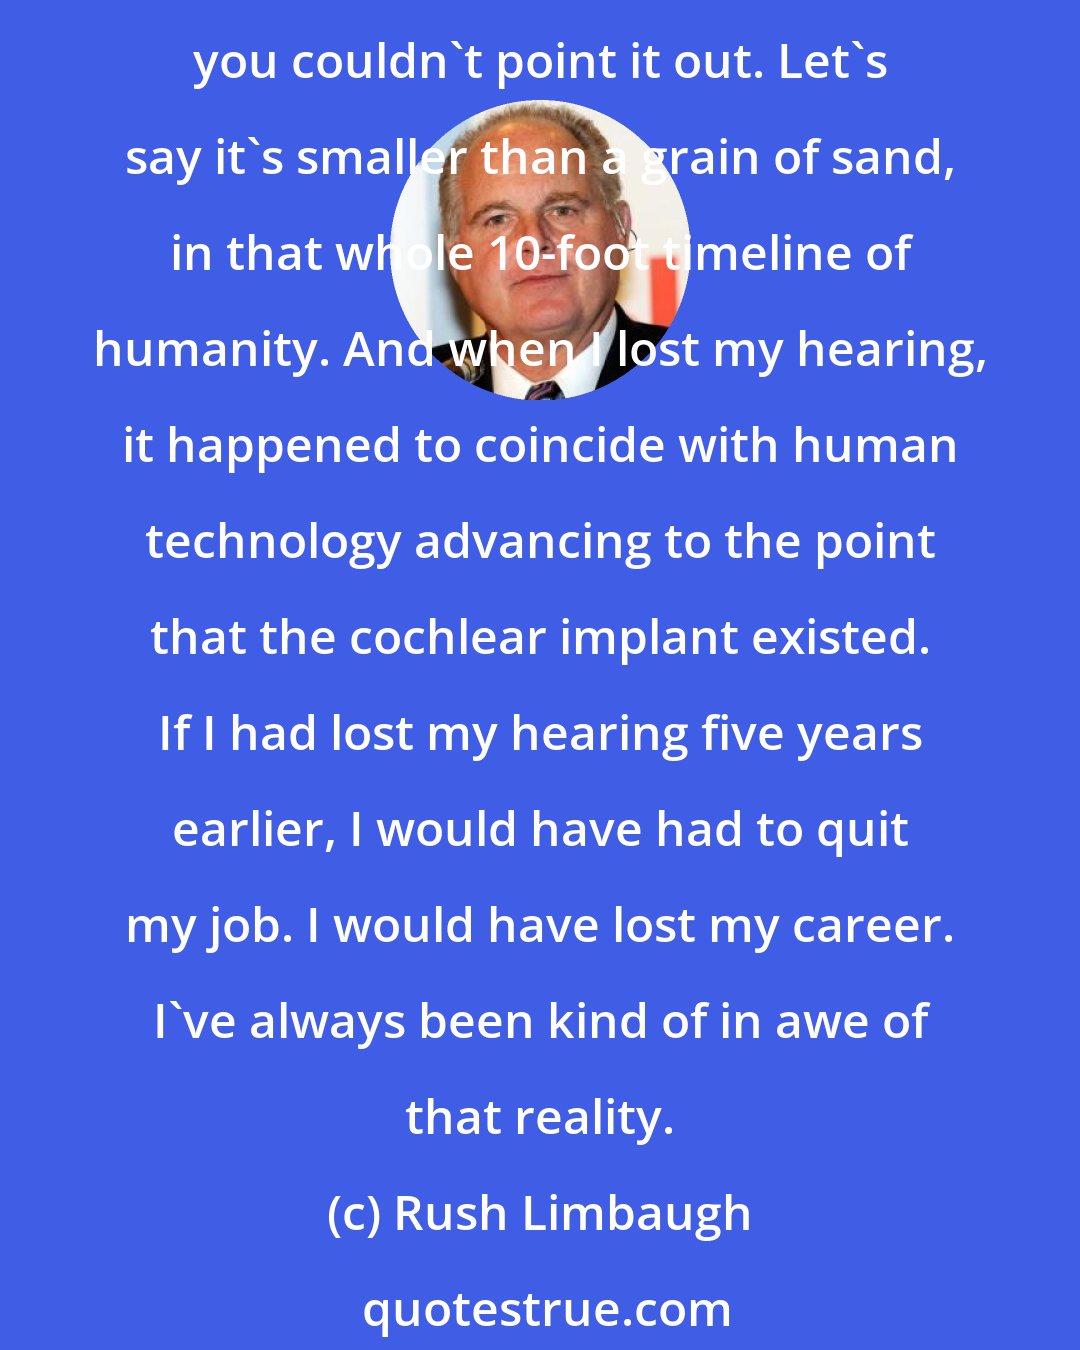 Rush Limbaugh: If you draw the entire timeline of humanity from the time humans first trod until today, let's just assume that's 10 feet on a timeline. My time on that timeline is so small that you couldn't point it out. Let's say it's smaller than a grain of sand, in that whole 10-foot timeline of humanity. And when I lost my hearing, it happened to coincide with human technology advancing to the point that the cochlear implant existed. If I had lost my hearing five years earlier, I would have had to quit my job. I would have lost my career. I've always been kind of in awe of that reality.